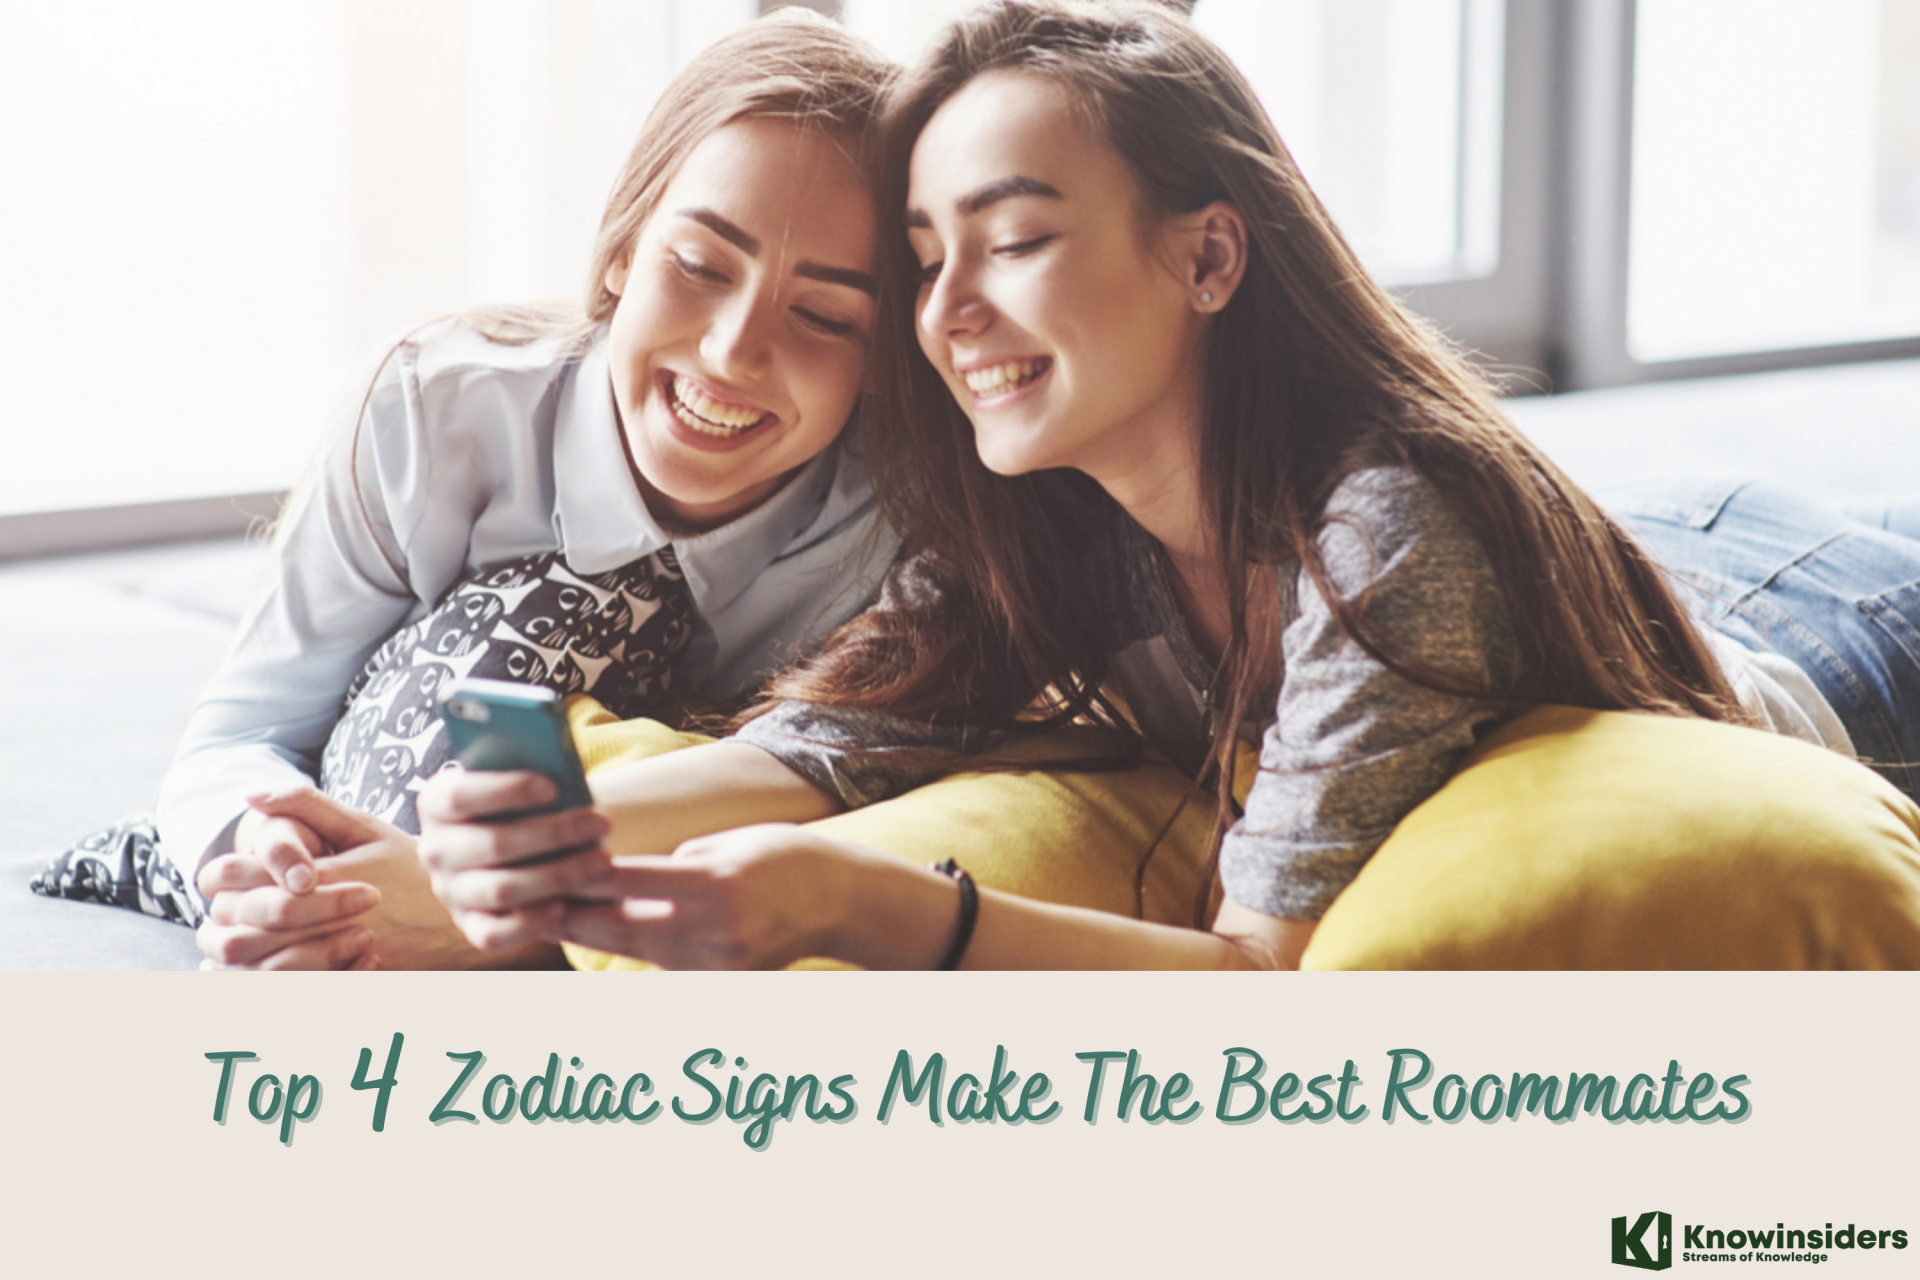 Top 4 Zodiac Signs Who Are The Best Roommates